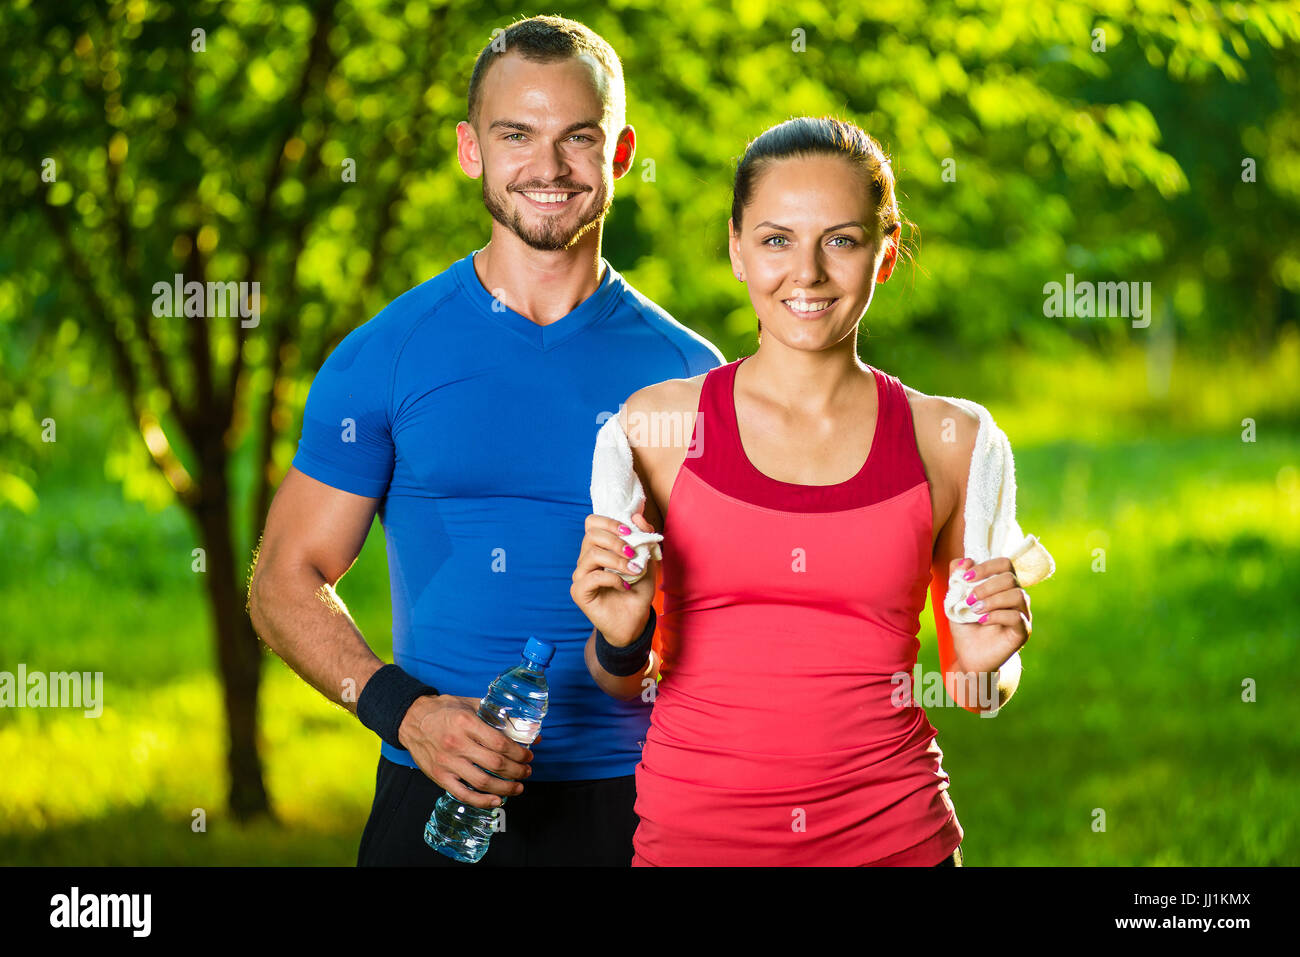 Athletic man and woman after fitness exercise Stock Photo